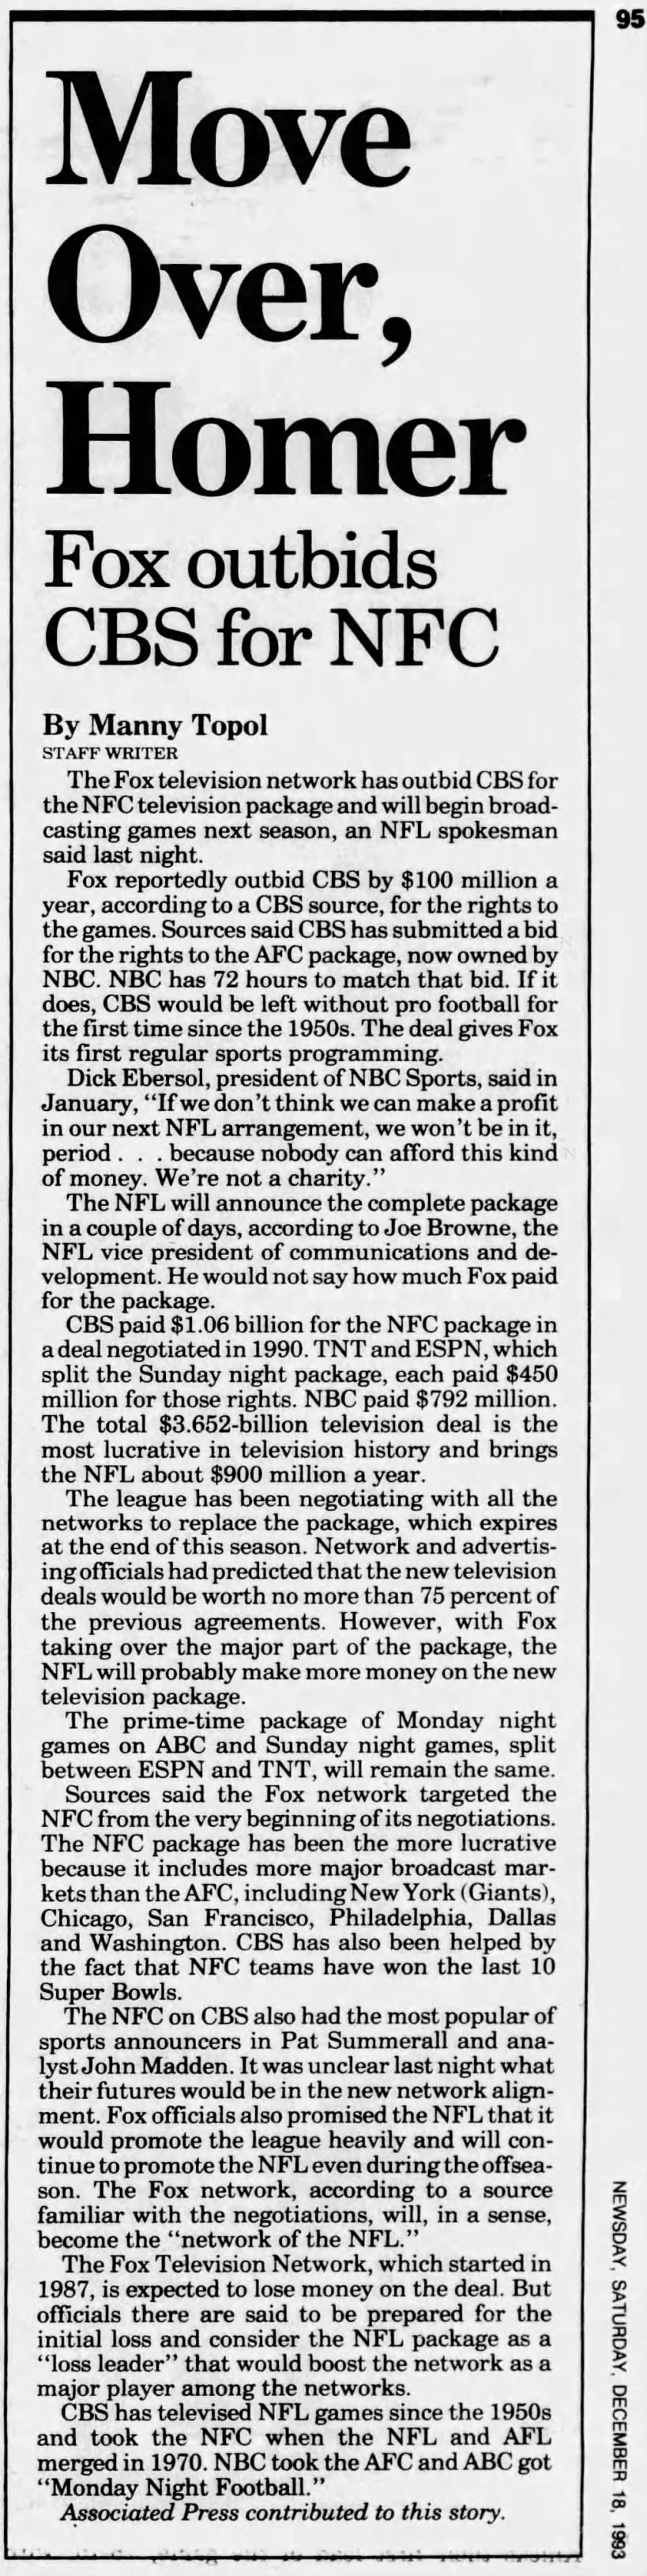 Move Over, Homer: Fox outbids CBS for NFC